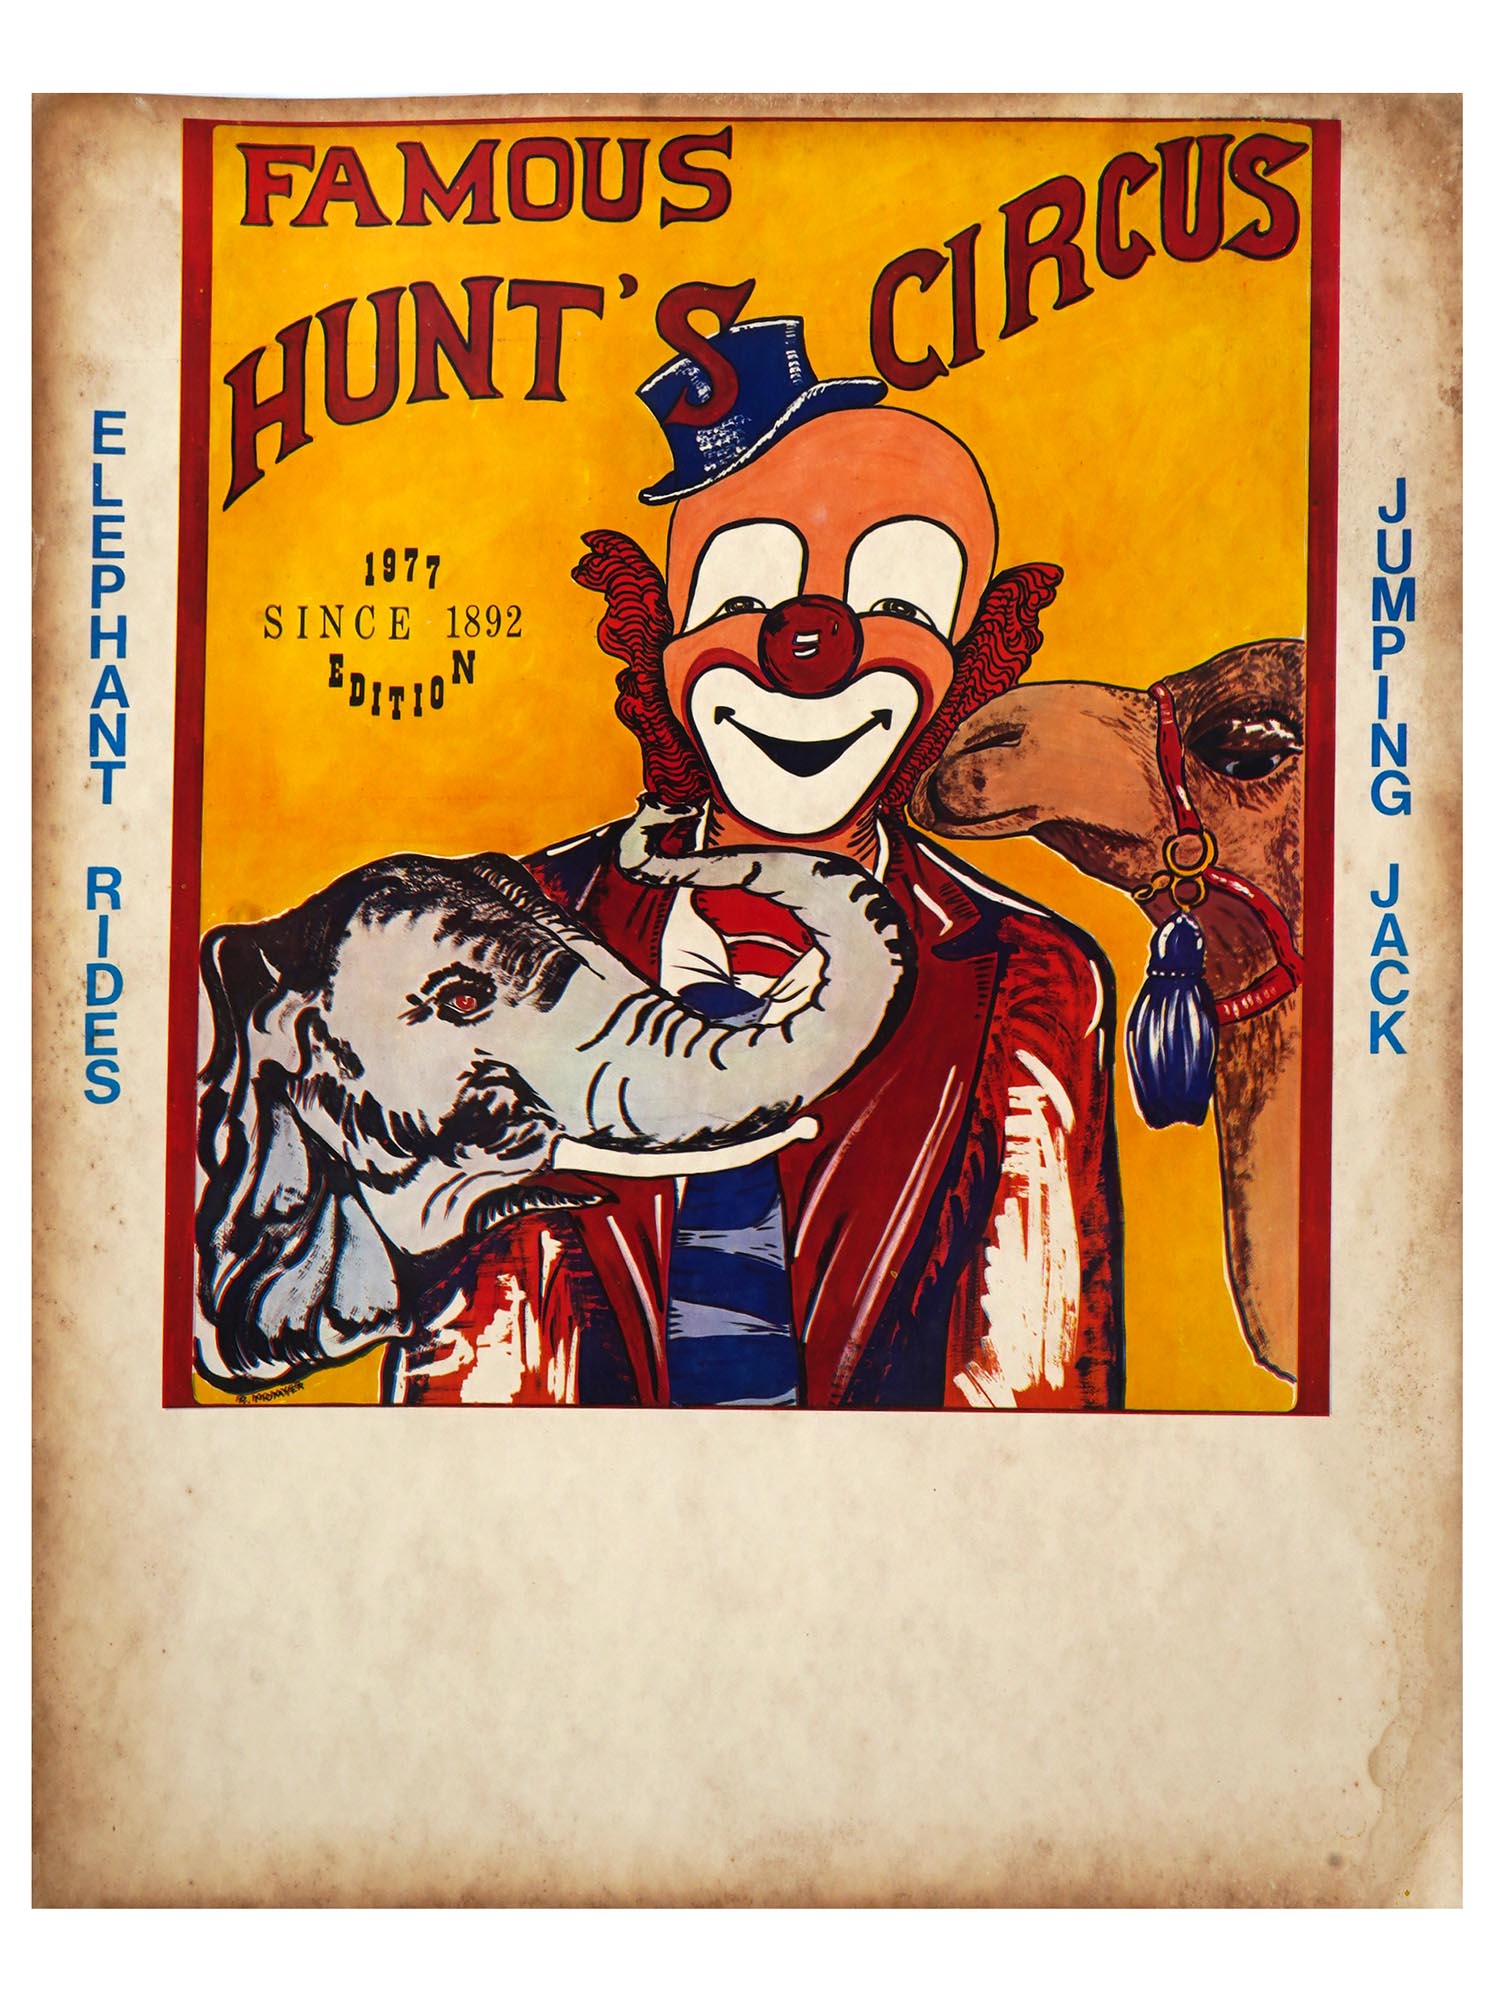 1977 FAMOUS HUNT CIRCUS LITHOGRAPH POSTER BY MOMYER PIC-0